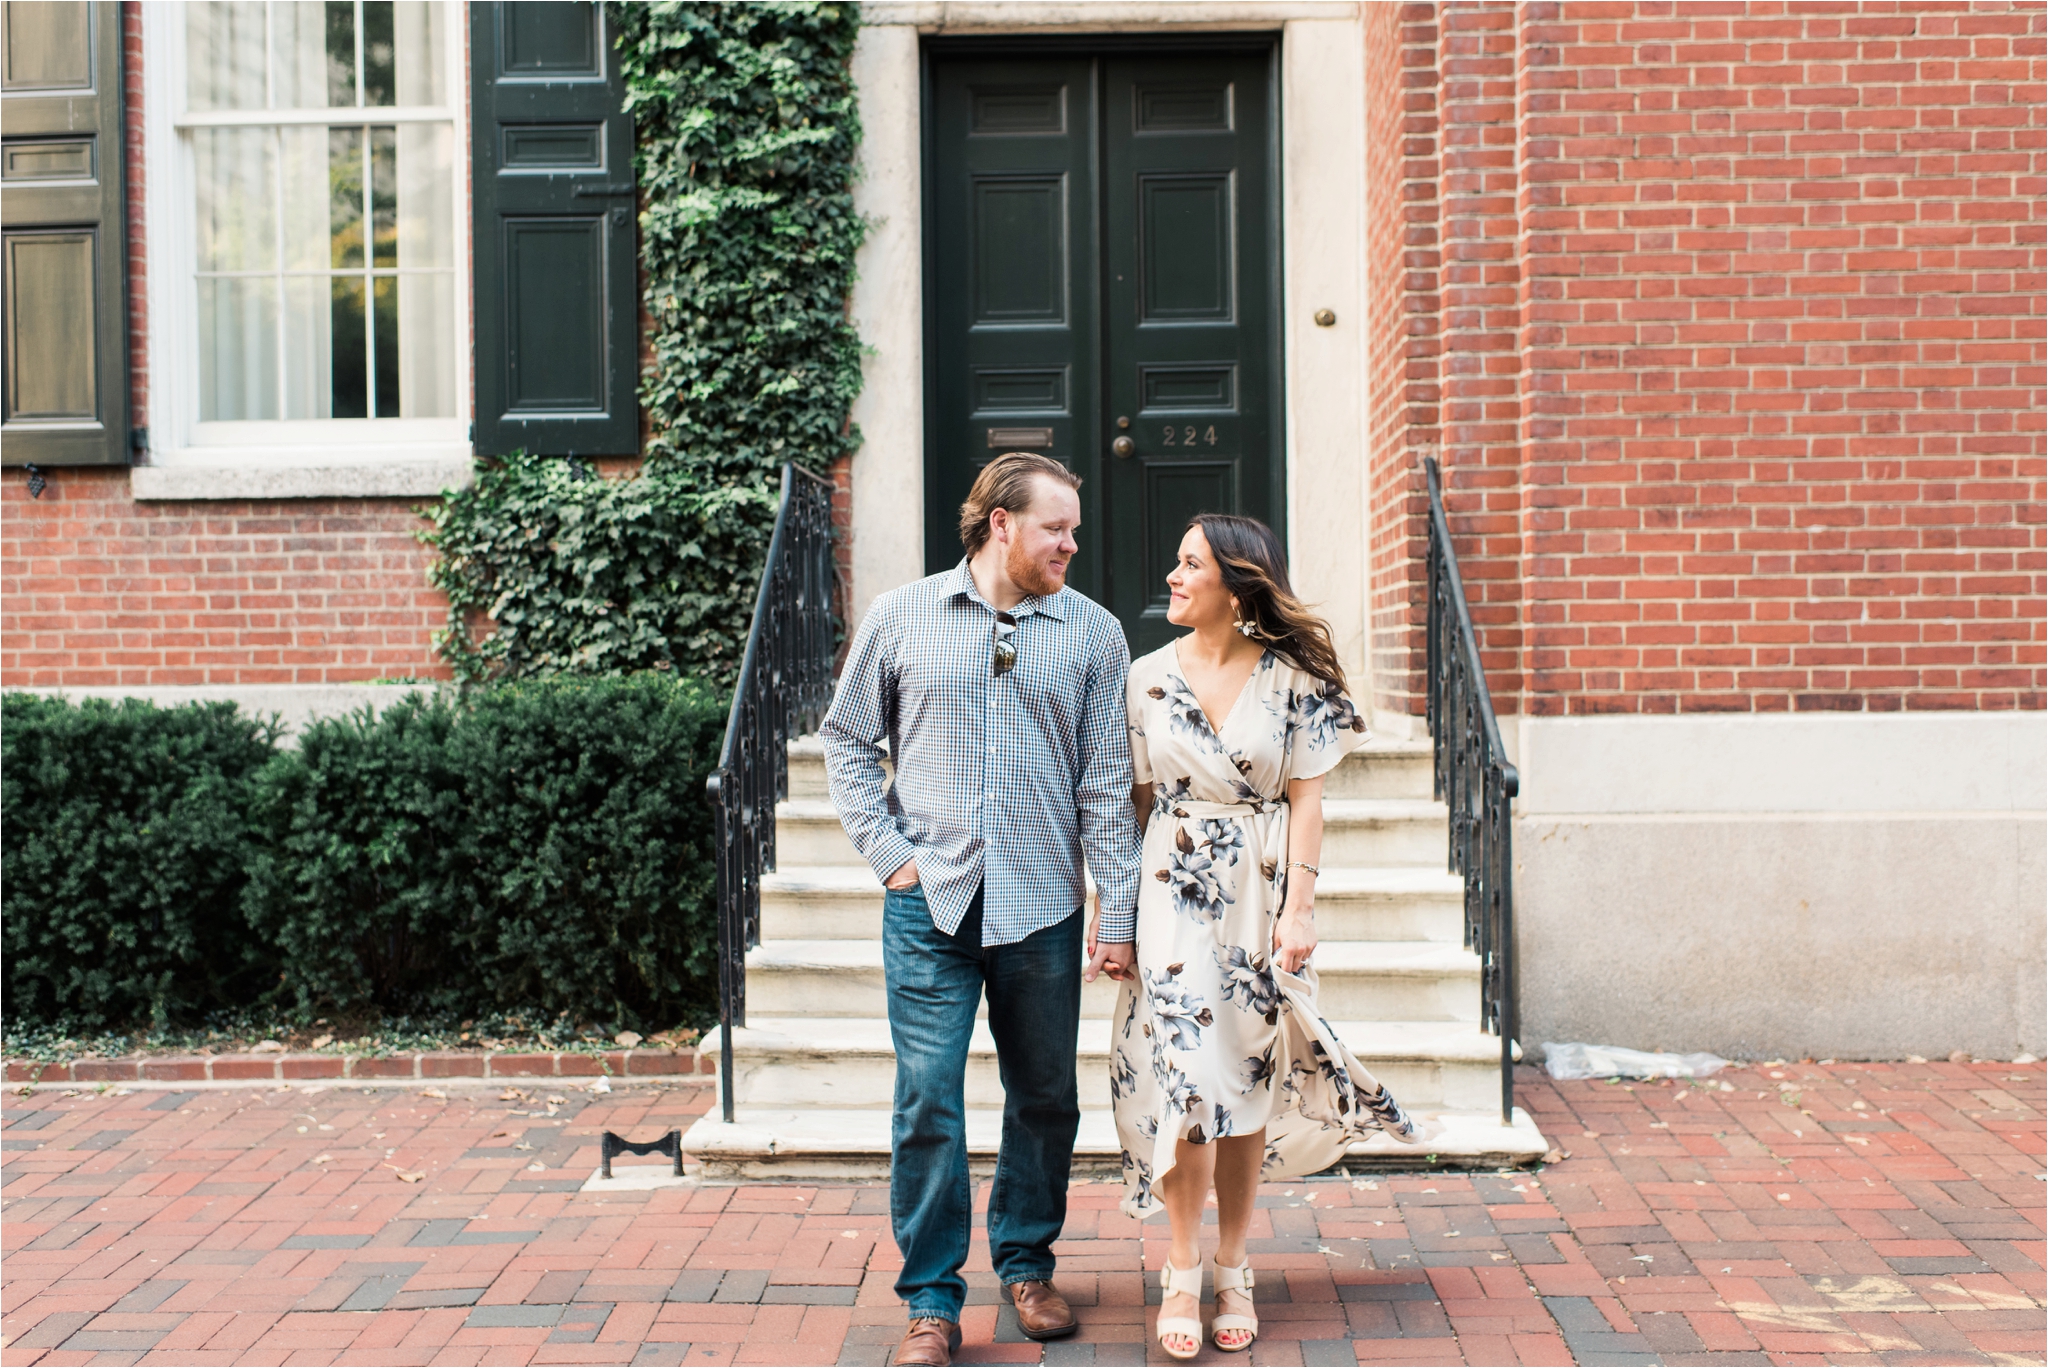 Headhouse Square Philadelphia Engagements by Hillary Muelleck Photography // hillarymuelleck.com